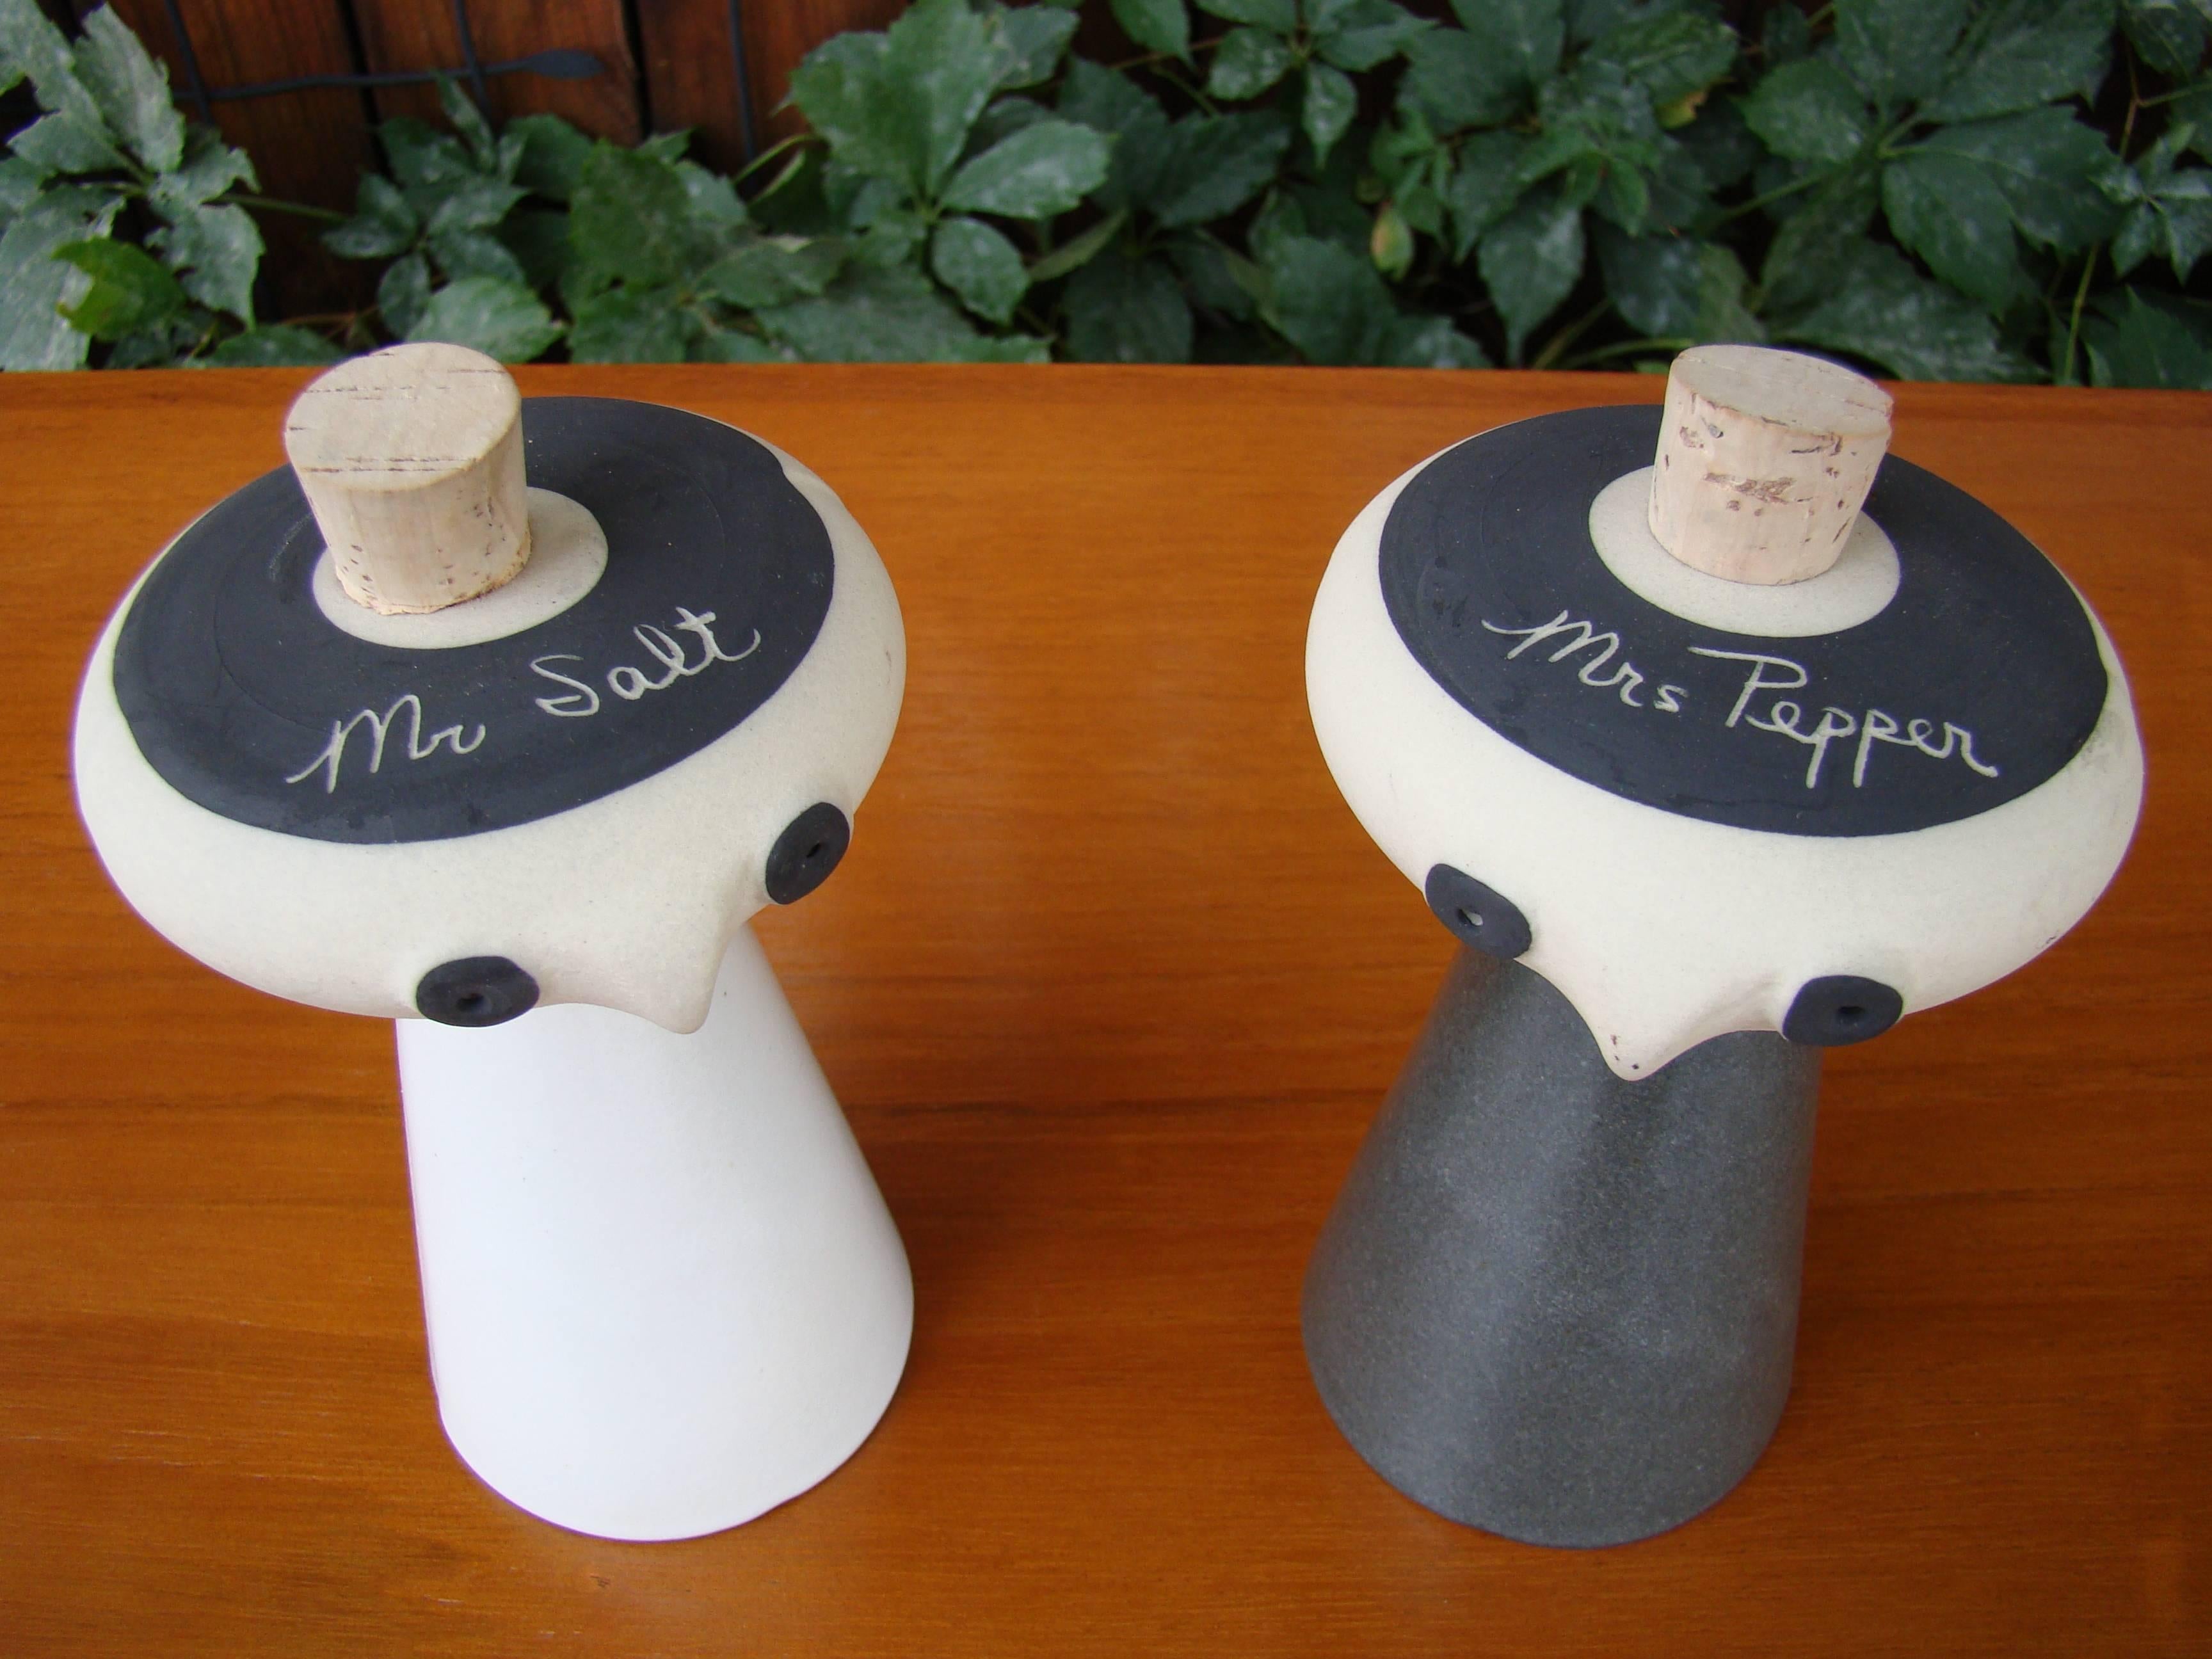 Large and playful, this fine 'studio ceramic' salt and pepper service is beautiful, amusing and functional all at once. Designed by David Gil in the early 1960s for the Bennington Potters in Vermont. Salt and pepper easily fill at the top and